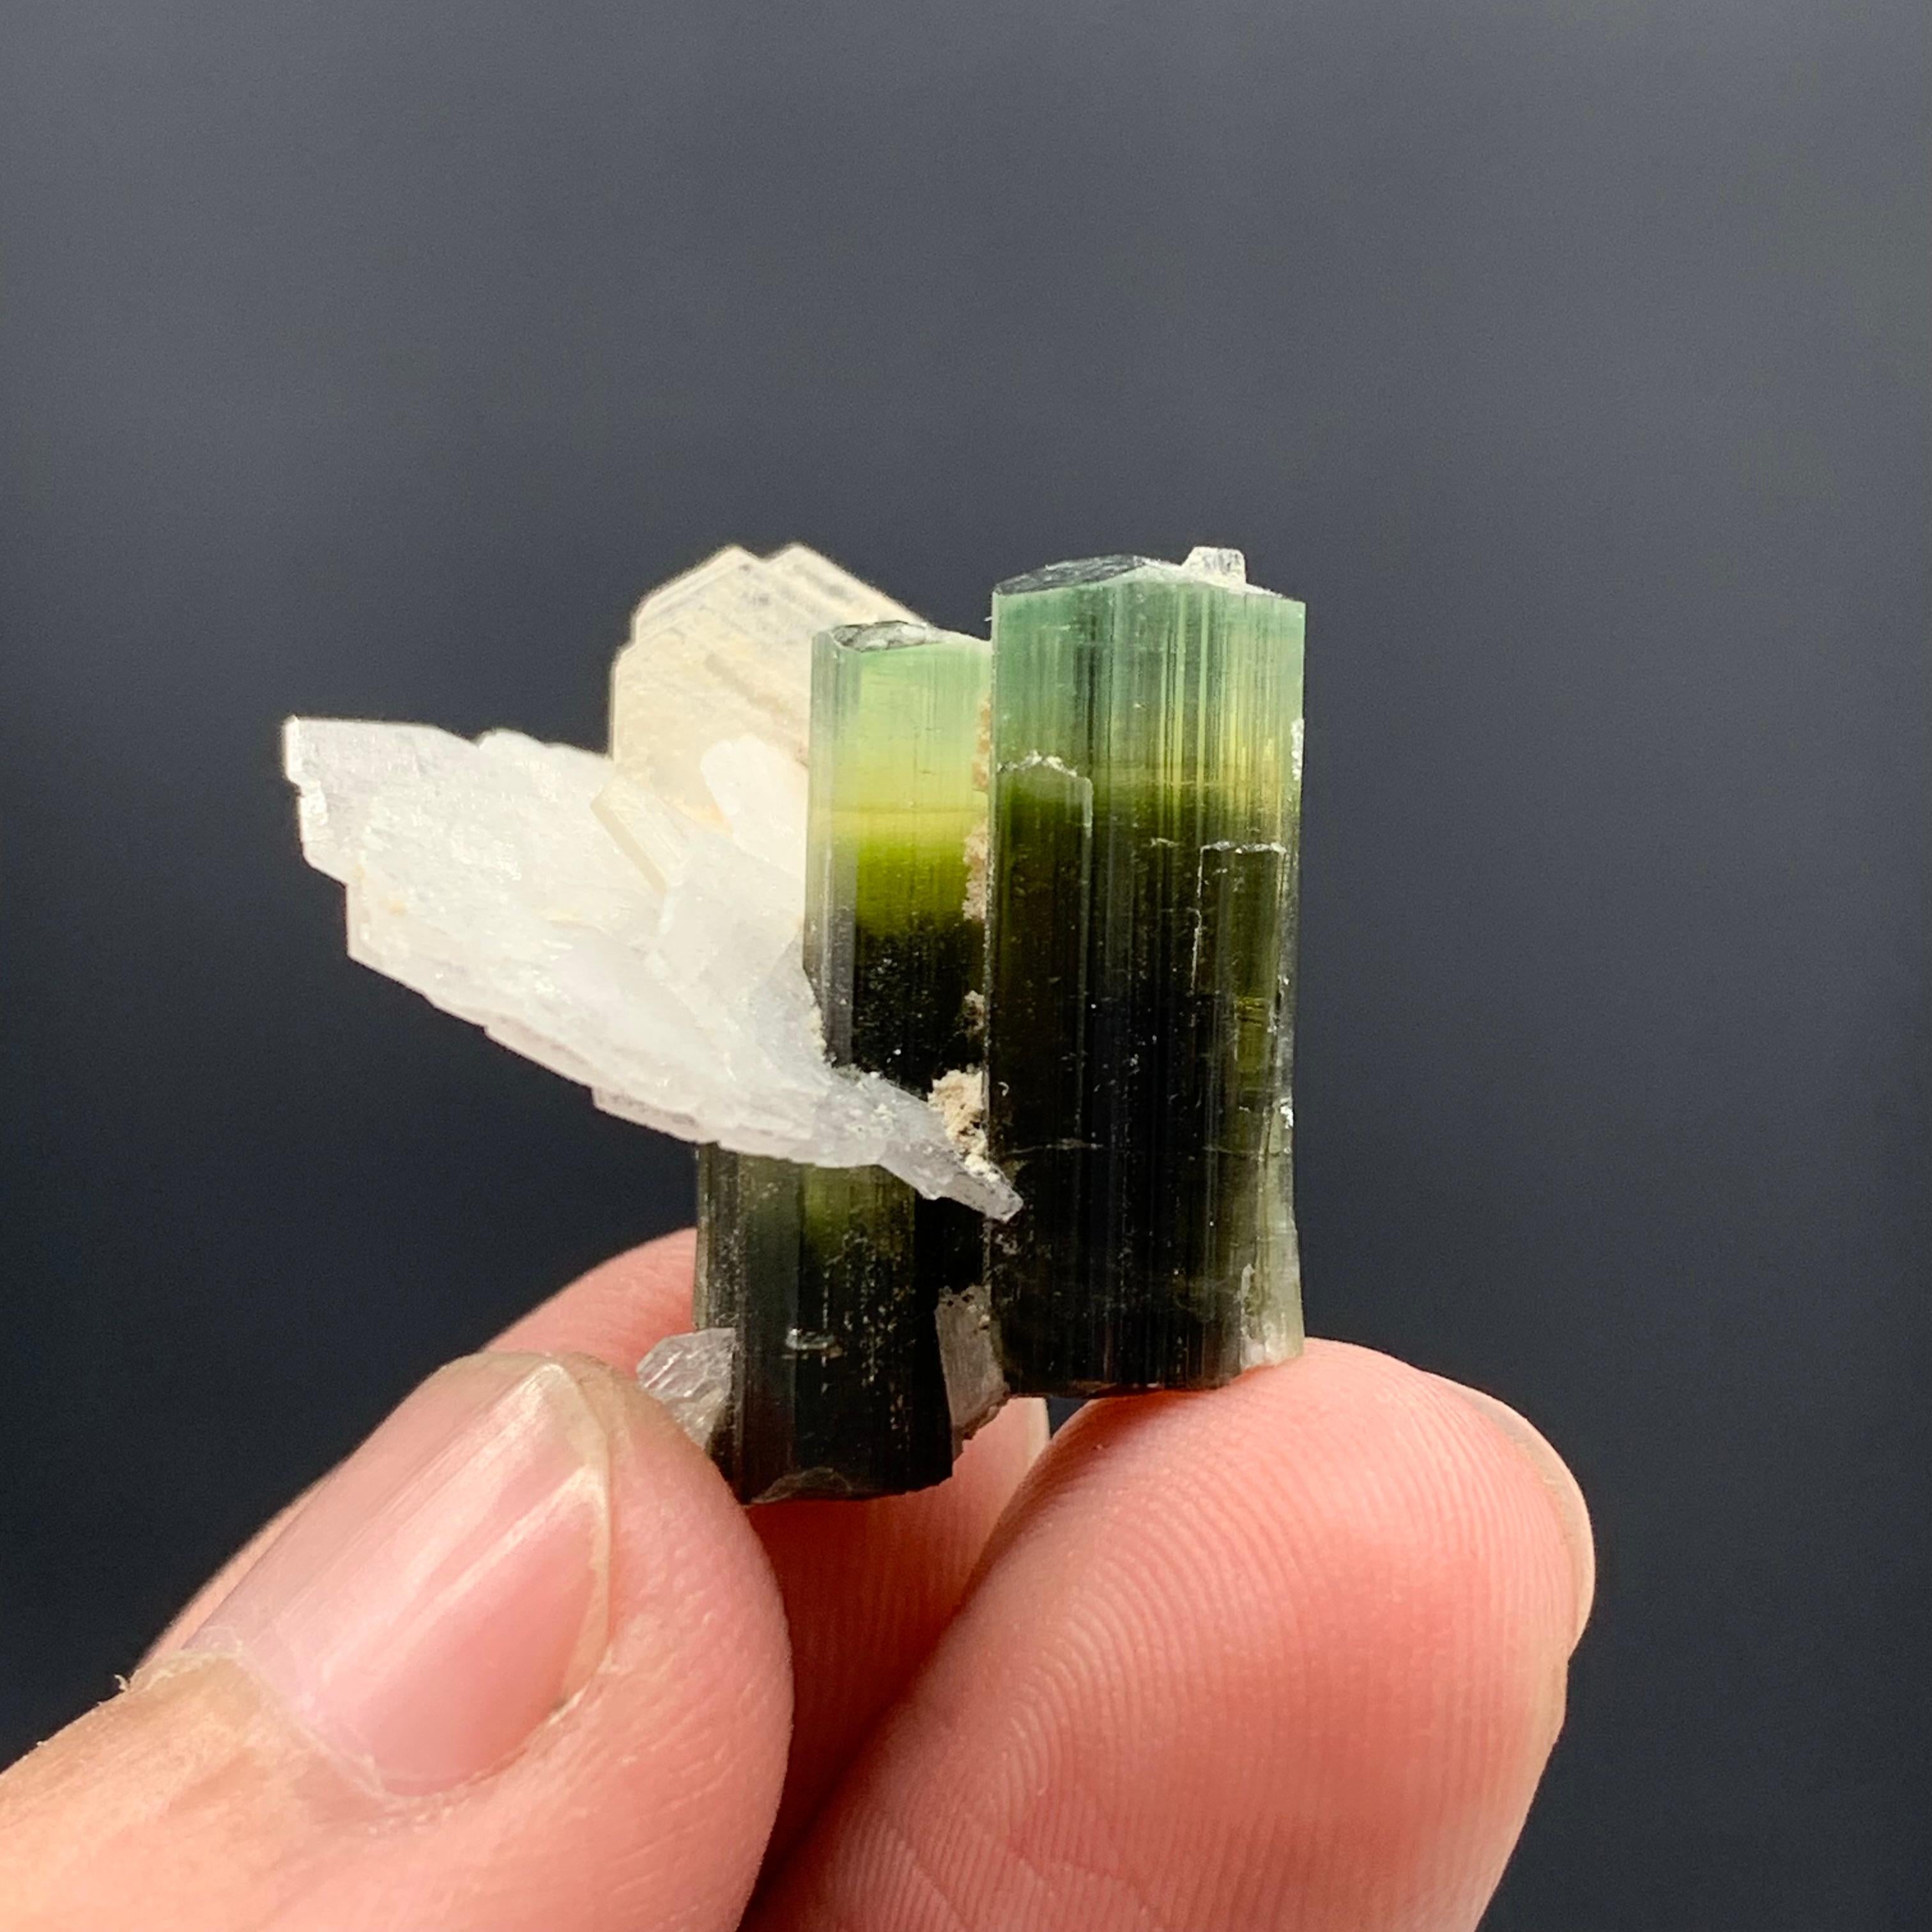 Other 5.61 Gram Dual Tourmaline Crystal With Albite From Stak Nala, Skardu, Pakistan  For Sale